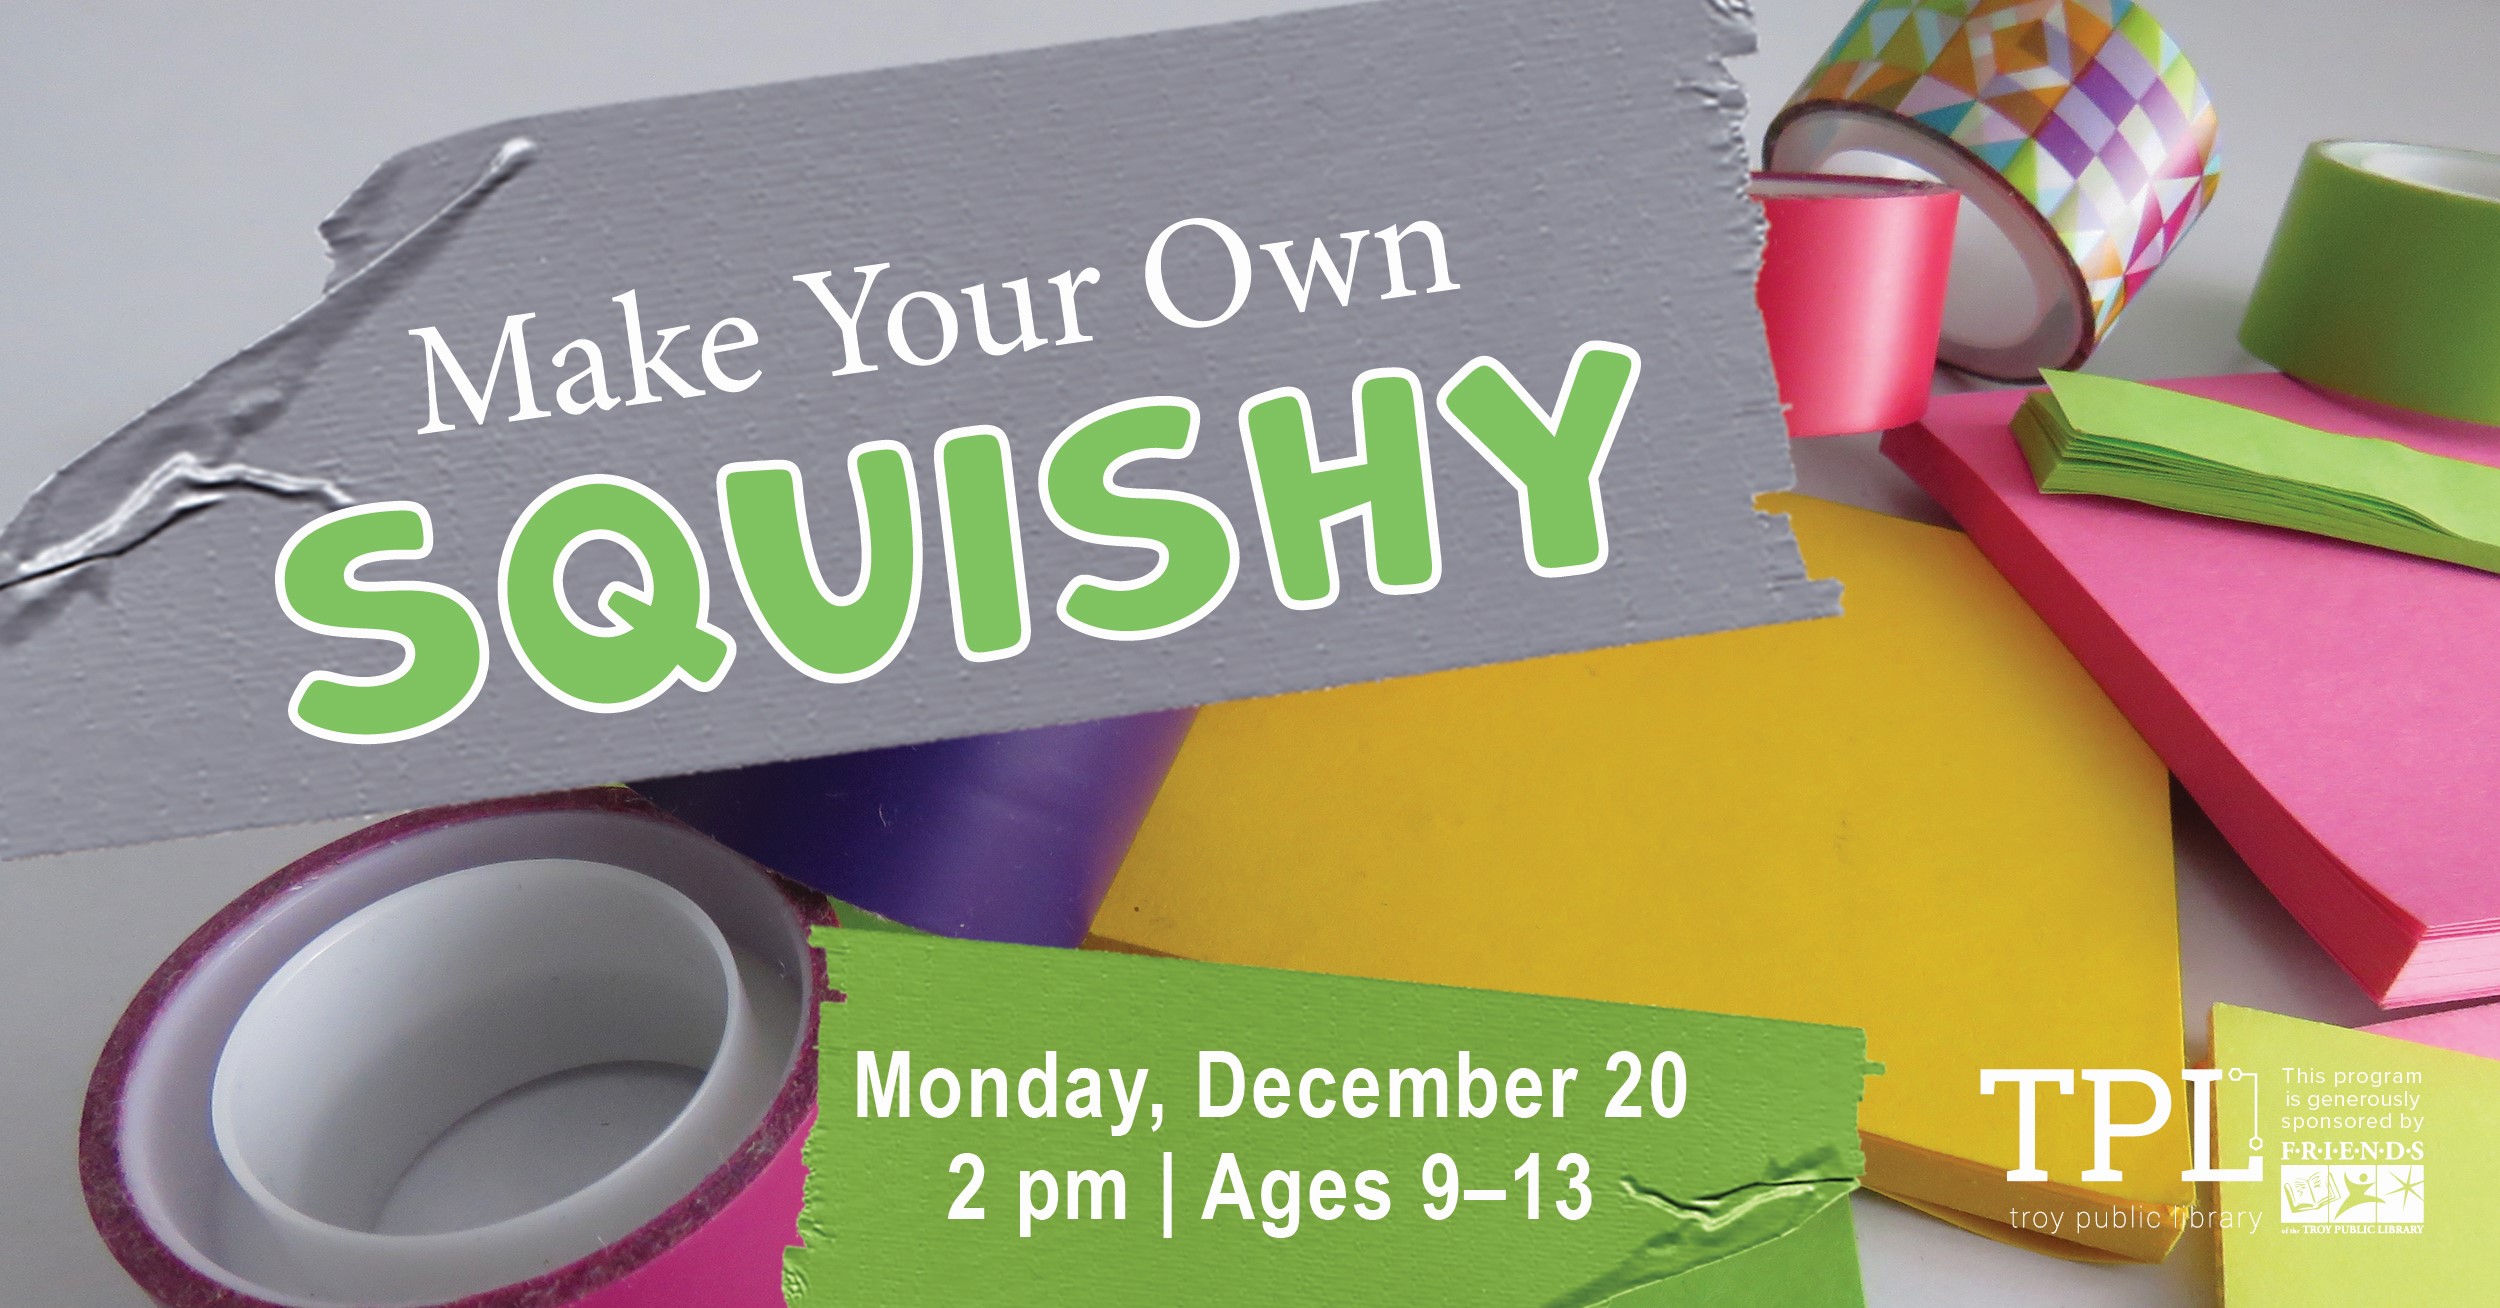 Make Your Own Squishy ages 9-13. Monday, December 20 at 2pm. Sponsored by the Friends of the Troy Public Library